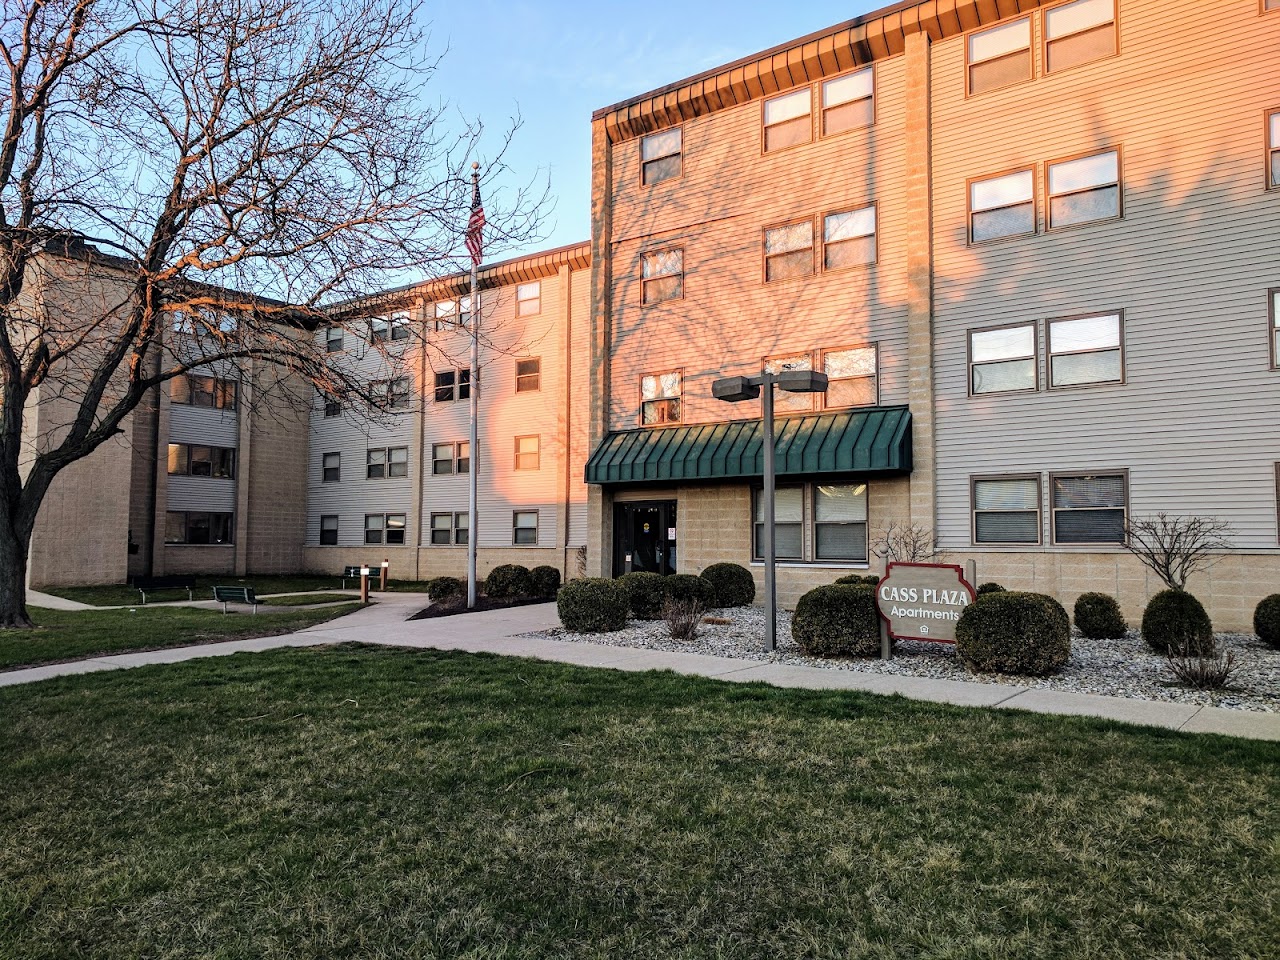 Photo of CASS PLAZA APARTMENTS. Affordable housing located at 300 CASS PLAZA DRIVE LOGANSPORT, IN 46947